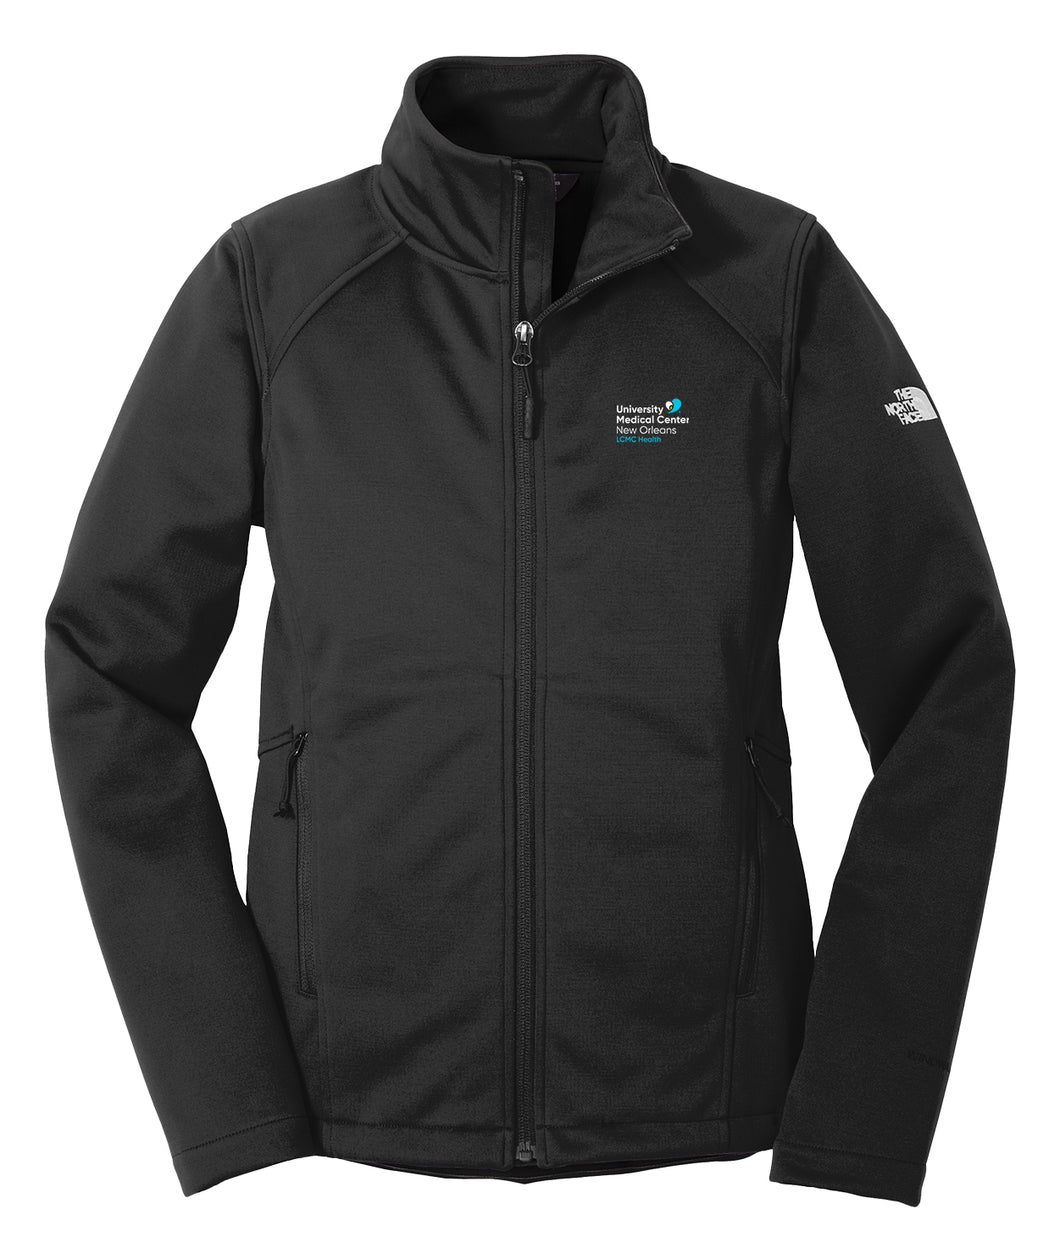 University Medical Center Medical Center Personal Item Ladies The North Face® Ladies Ridgewall Soft Shell Jacketwith Embroidered Logo